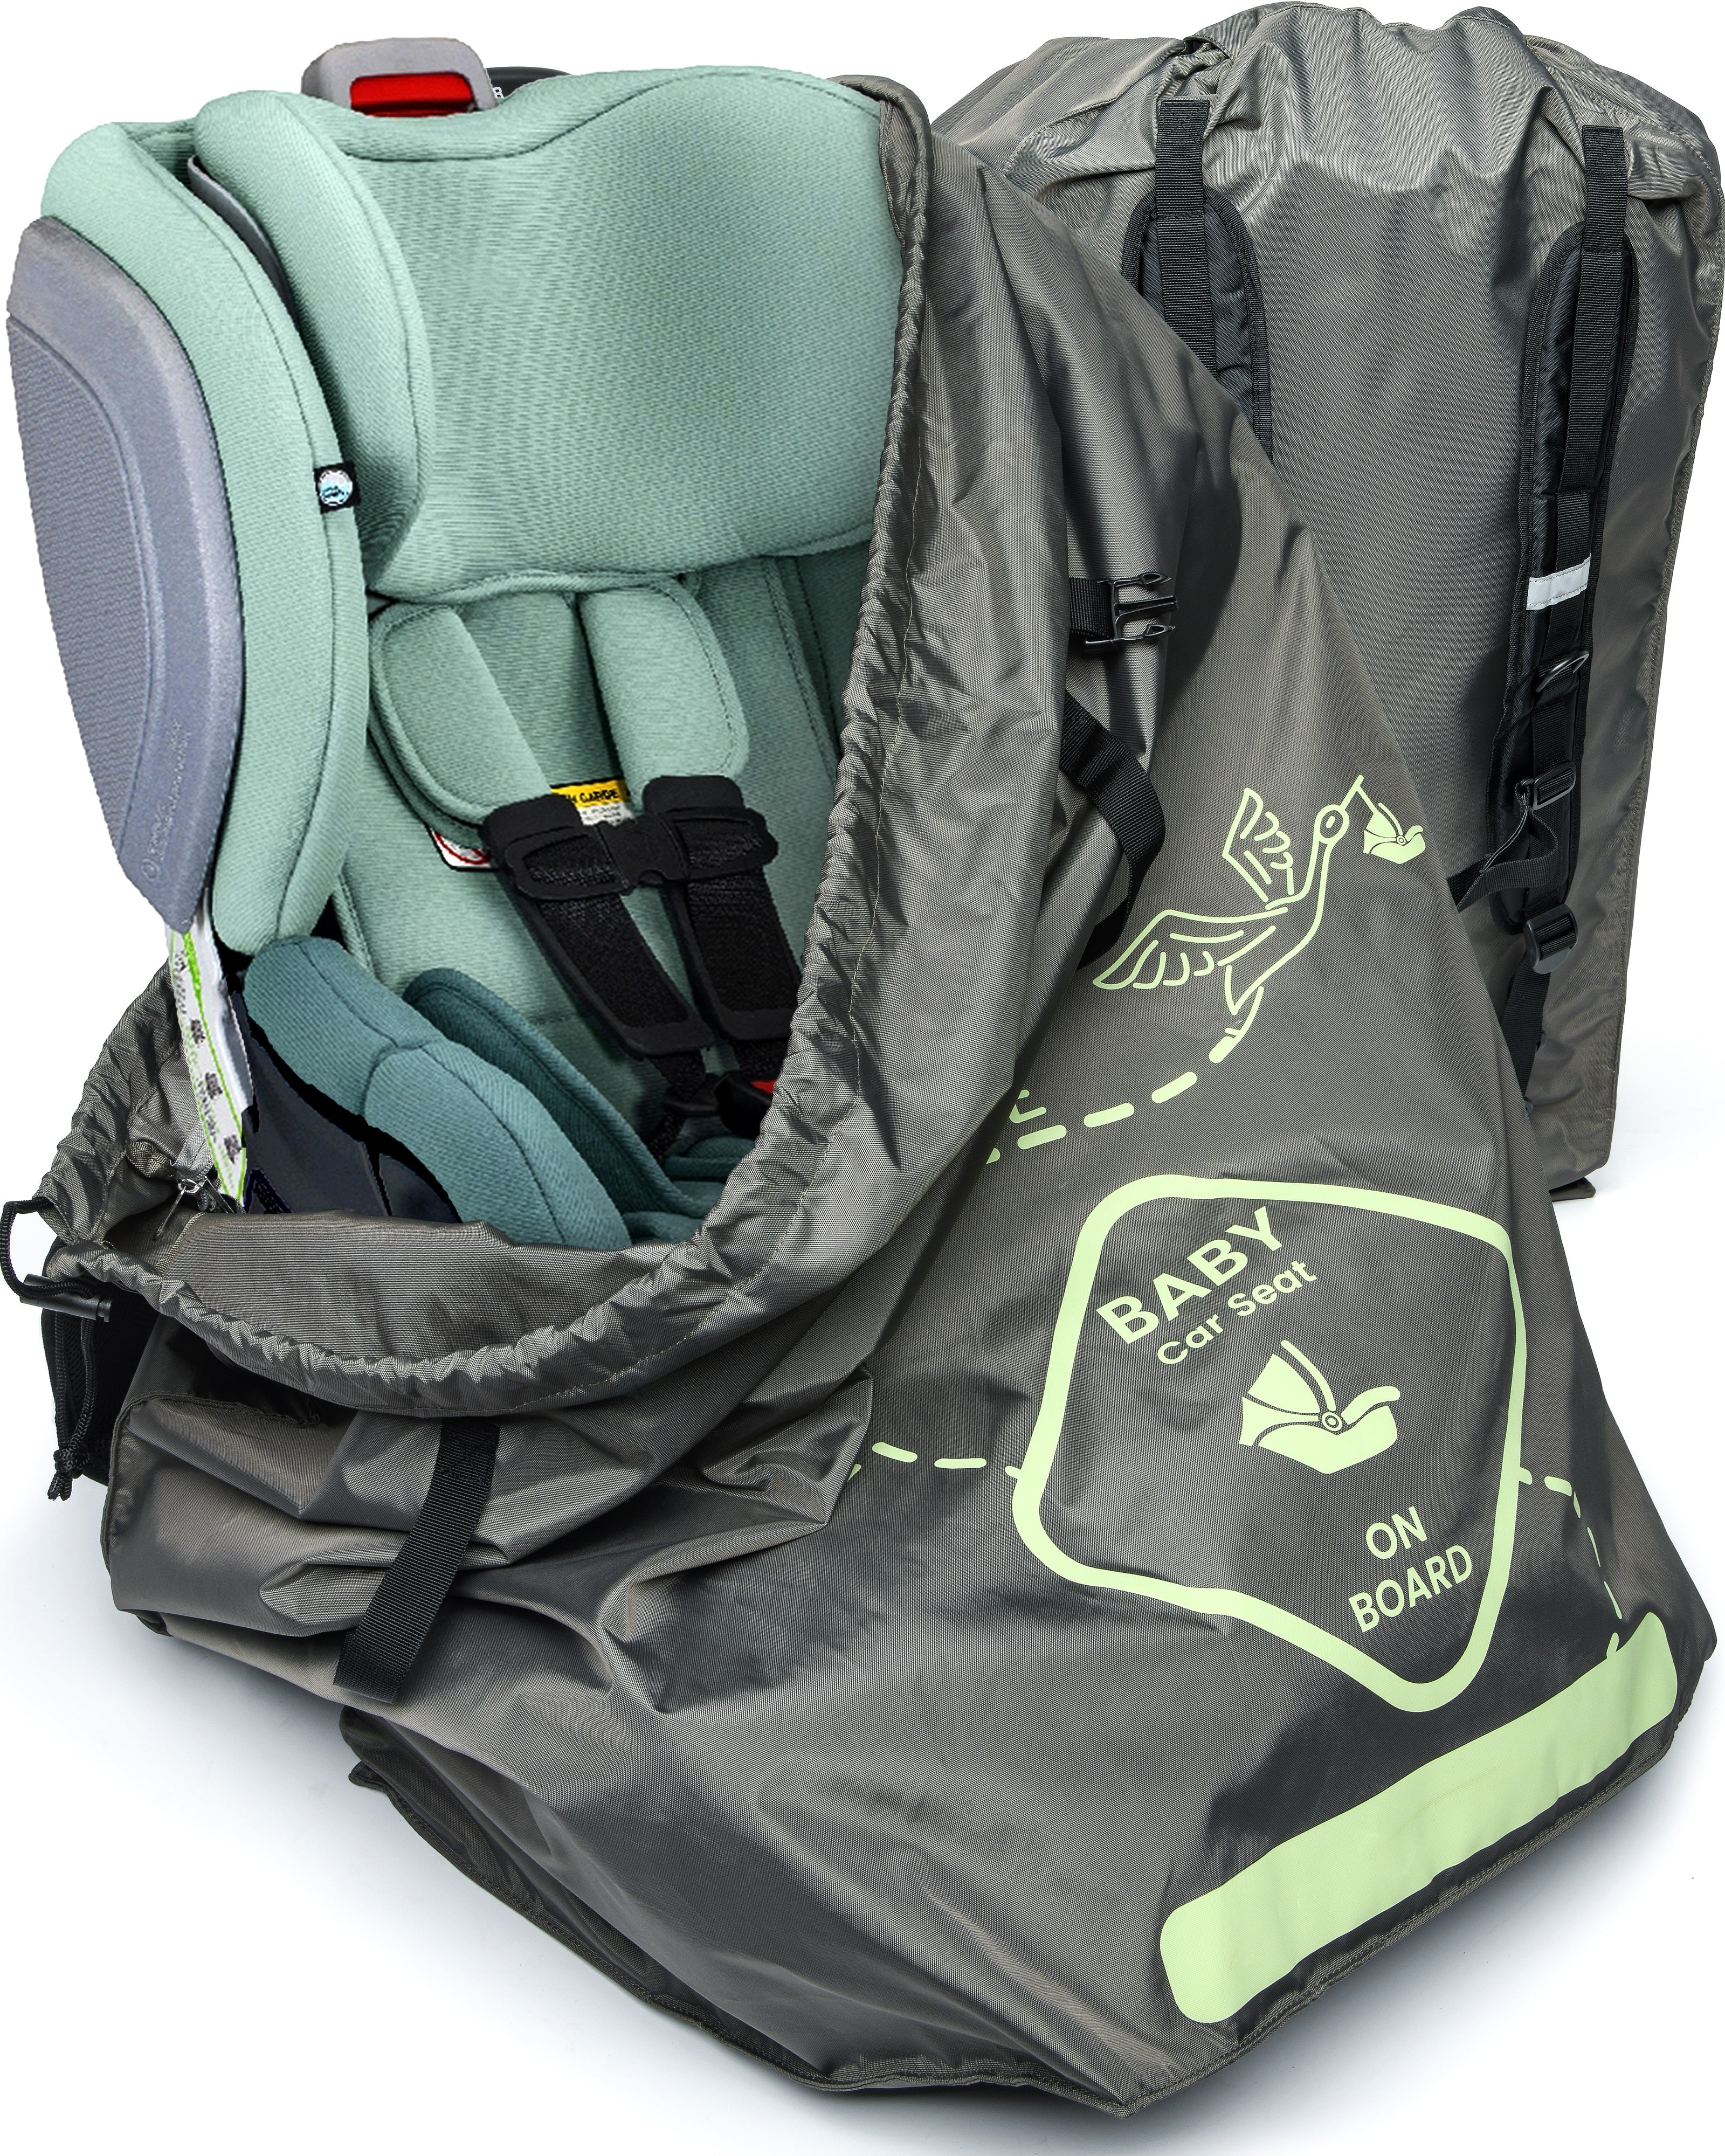 Flyte Gate Check Bag For Car Seats by The Little Stork